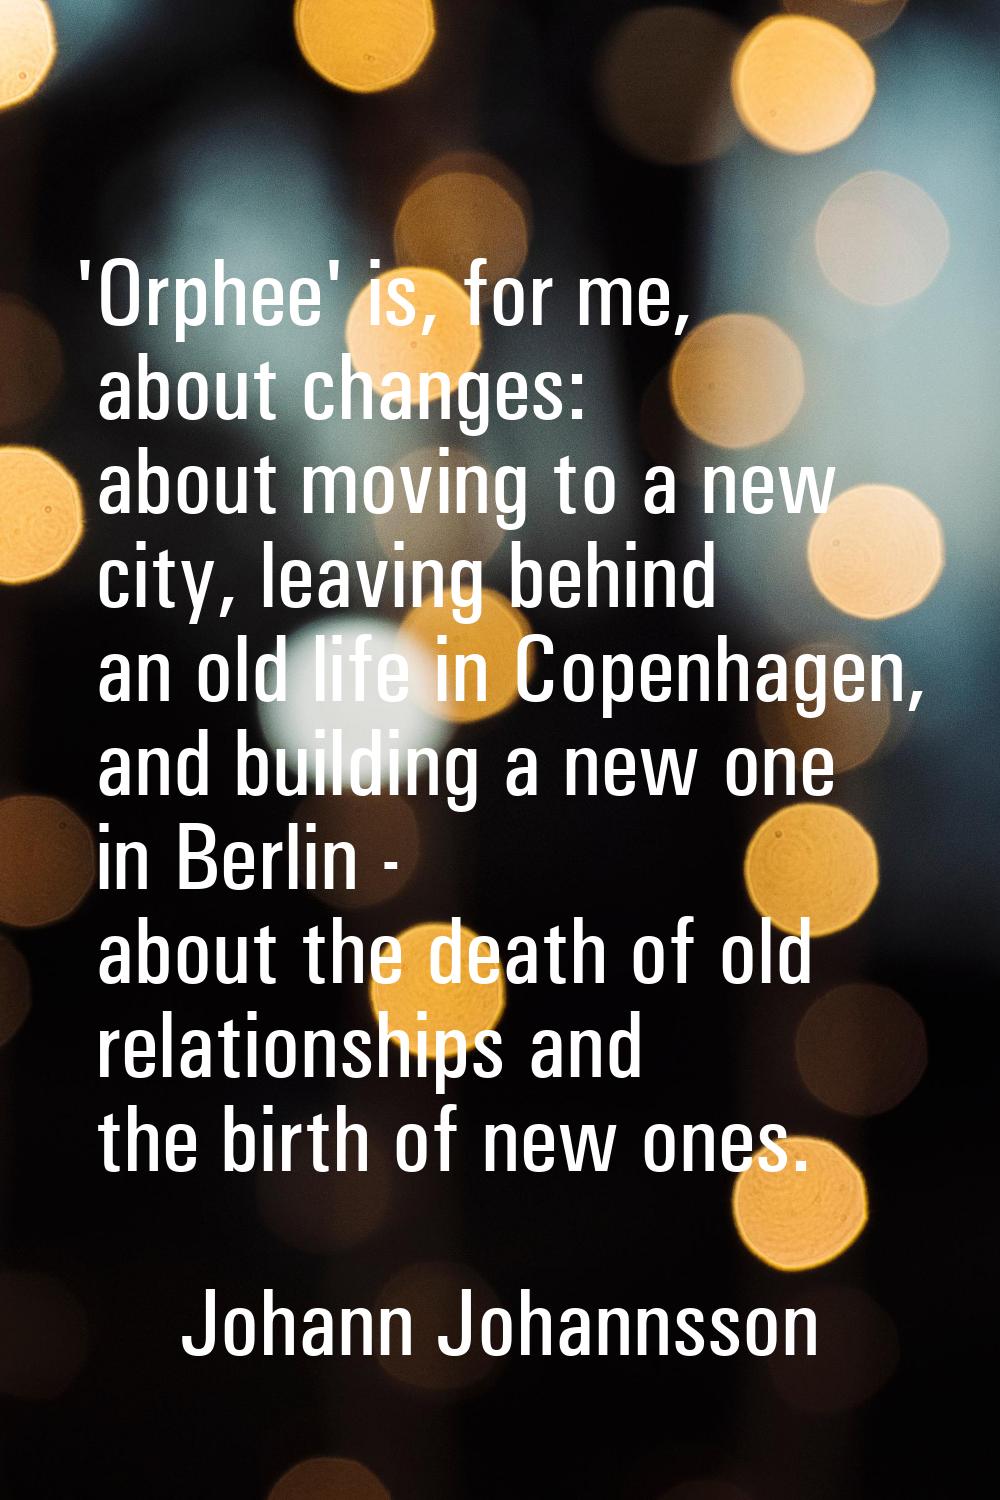 'Orphee' is, for me, about changes: about moving to a new city, leaving behind an old life in Copen